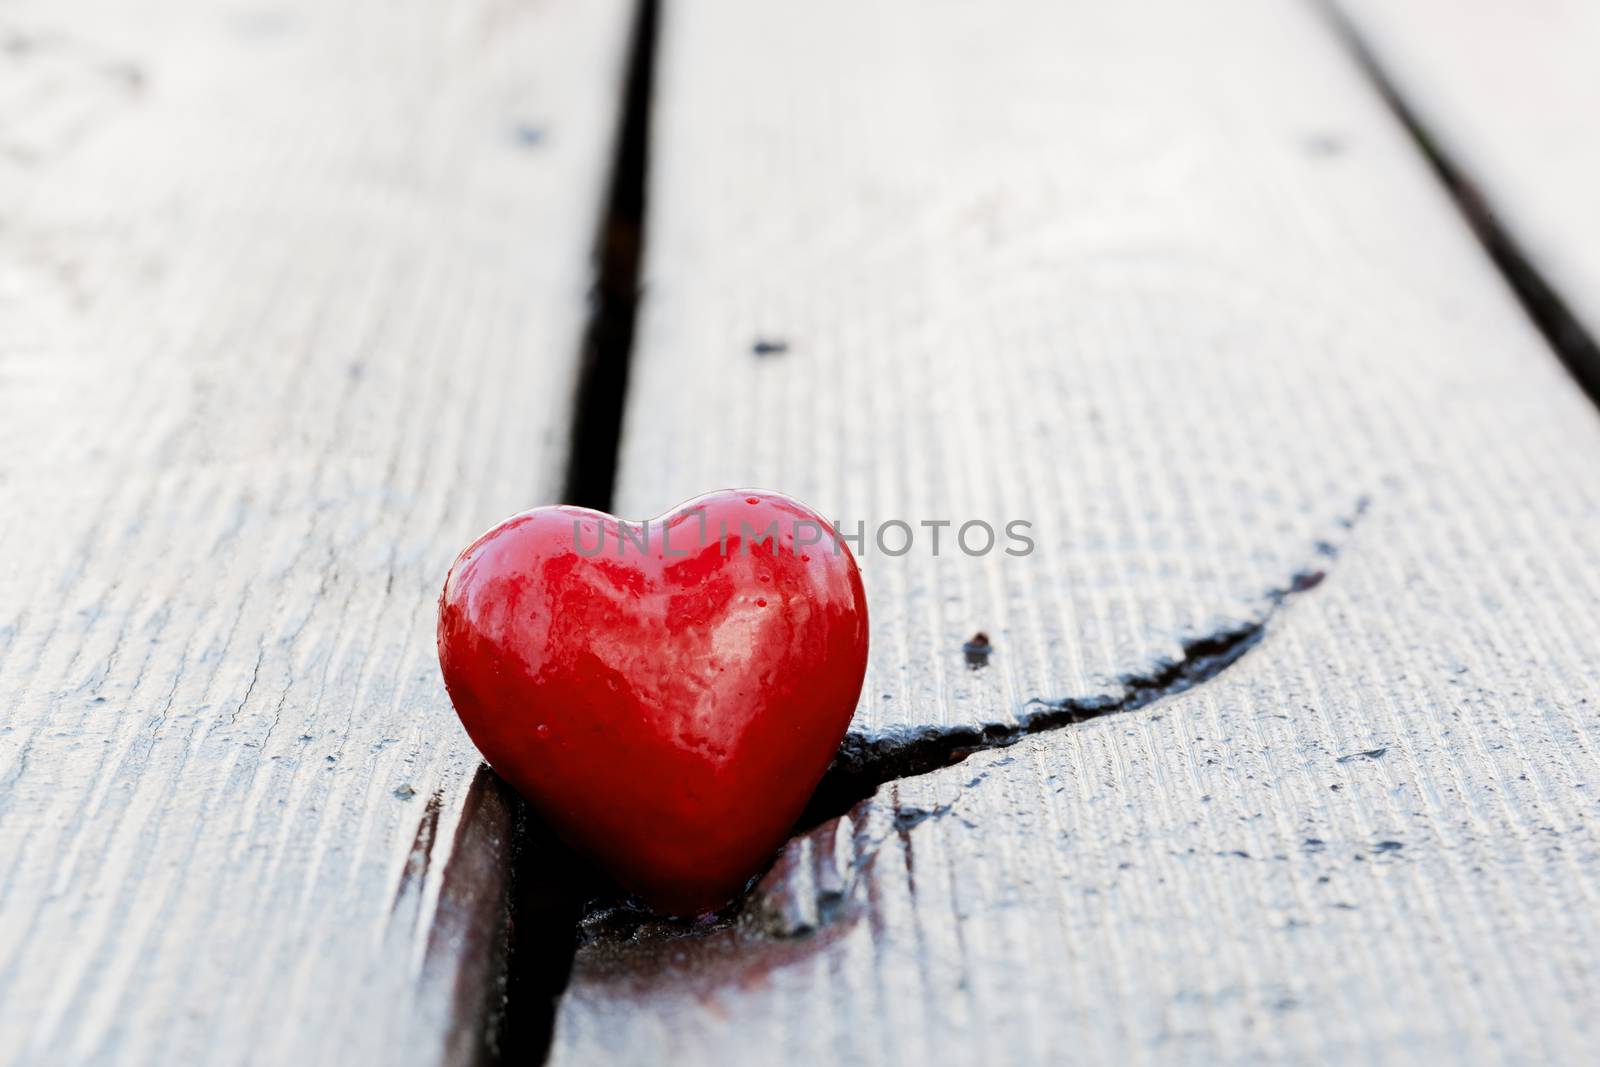 Red heart in crack of wooden plank. Symbol of love, Valentine's Day, a crack may symbolize a broken heart.